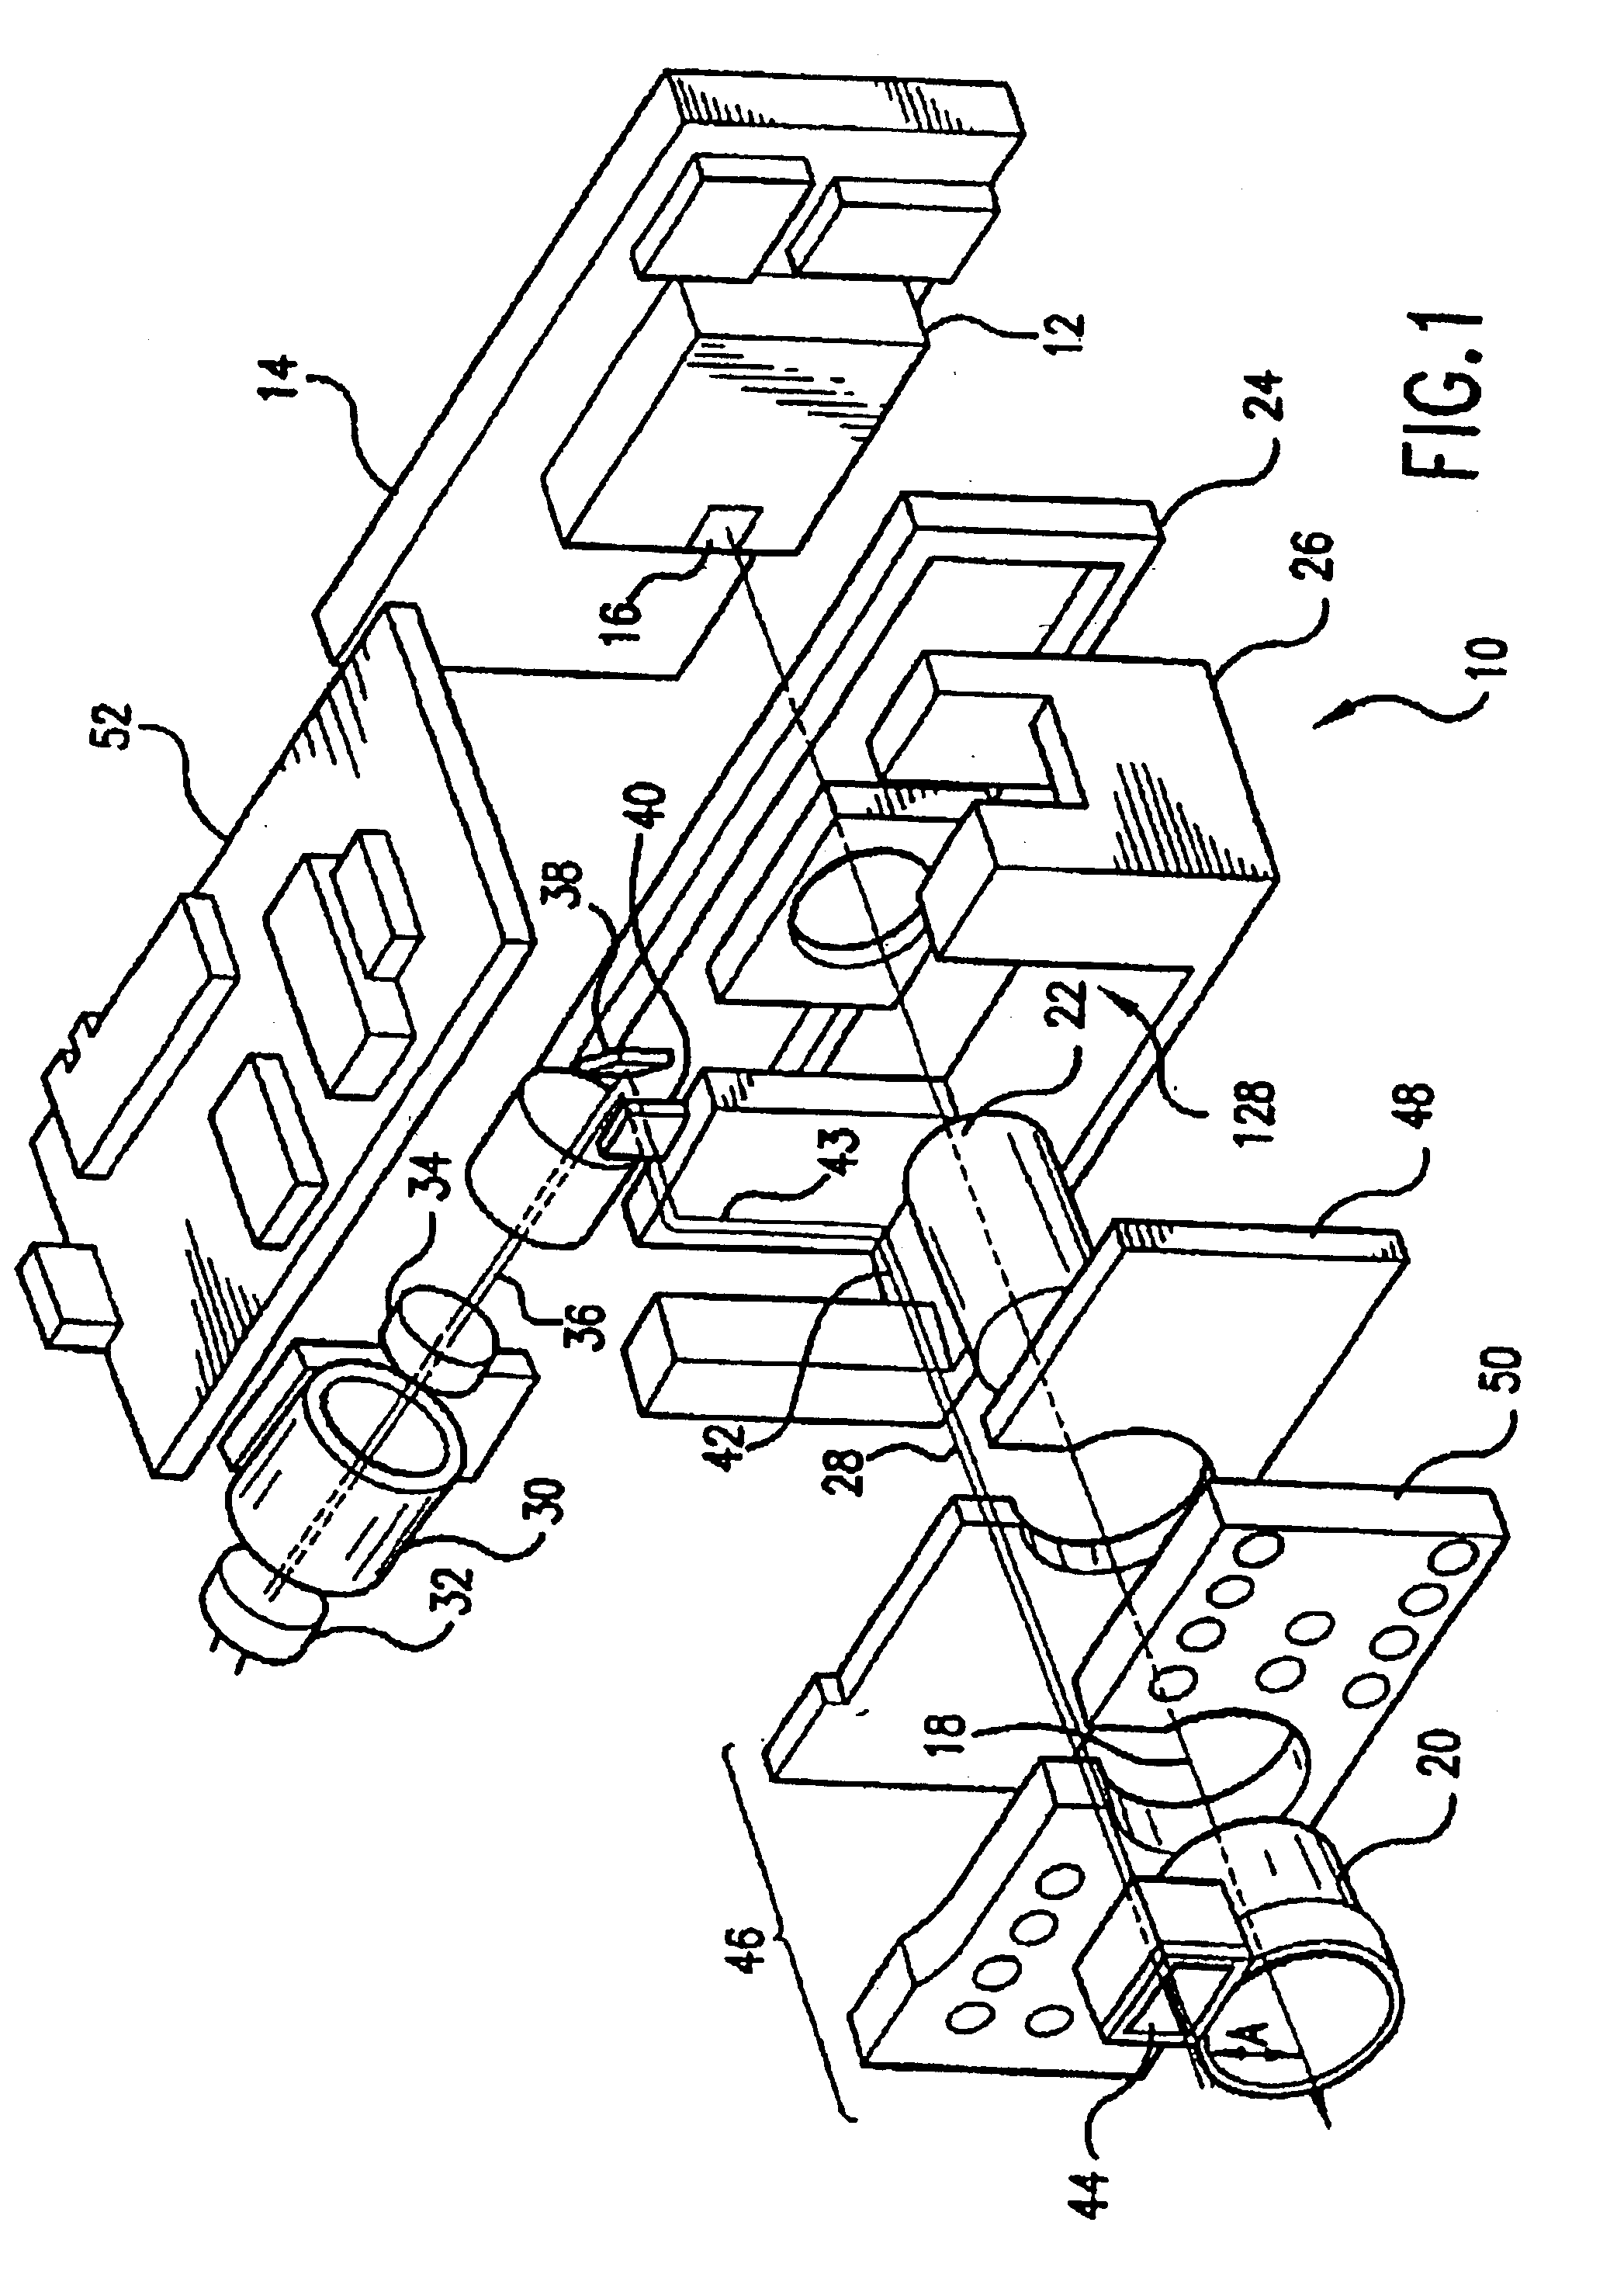 Image capture system and method using a common imaging array